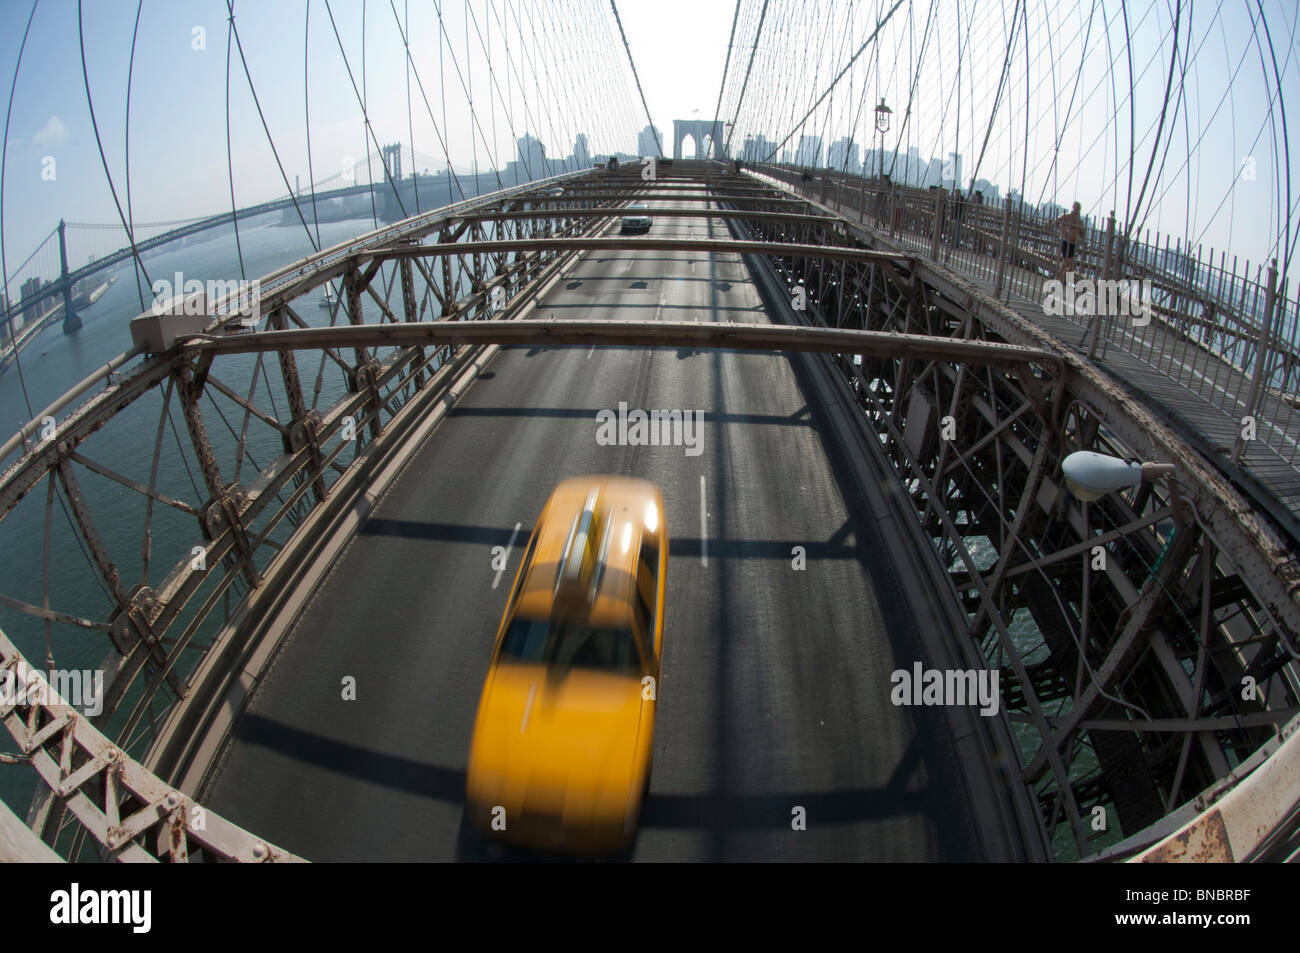 A Yellow Cab taxi on the Brooklyn Bridge between Manhattan and Brooklyn over the East River. New York Stock Photo